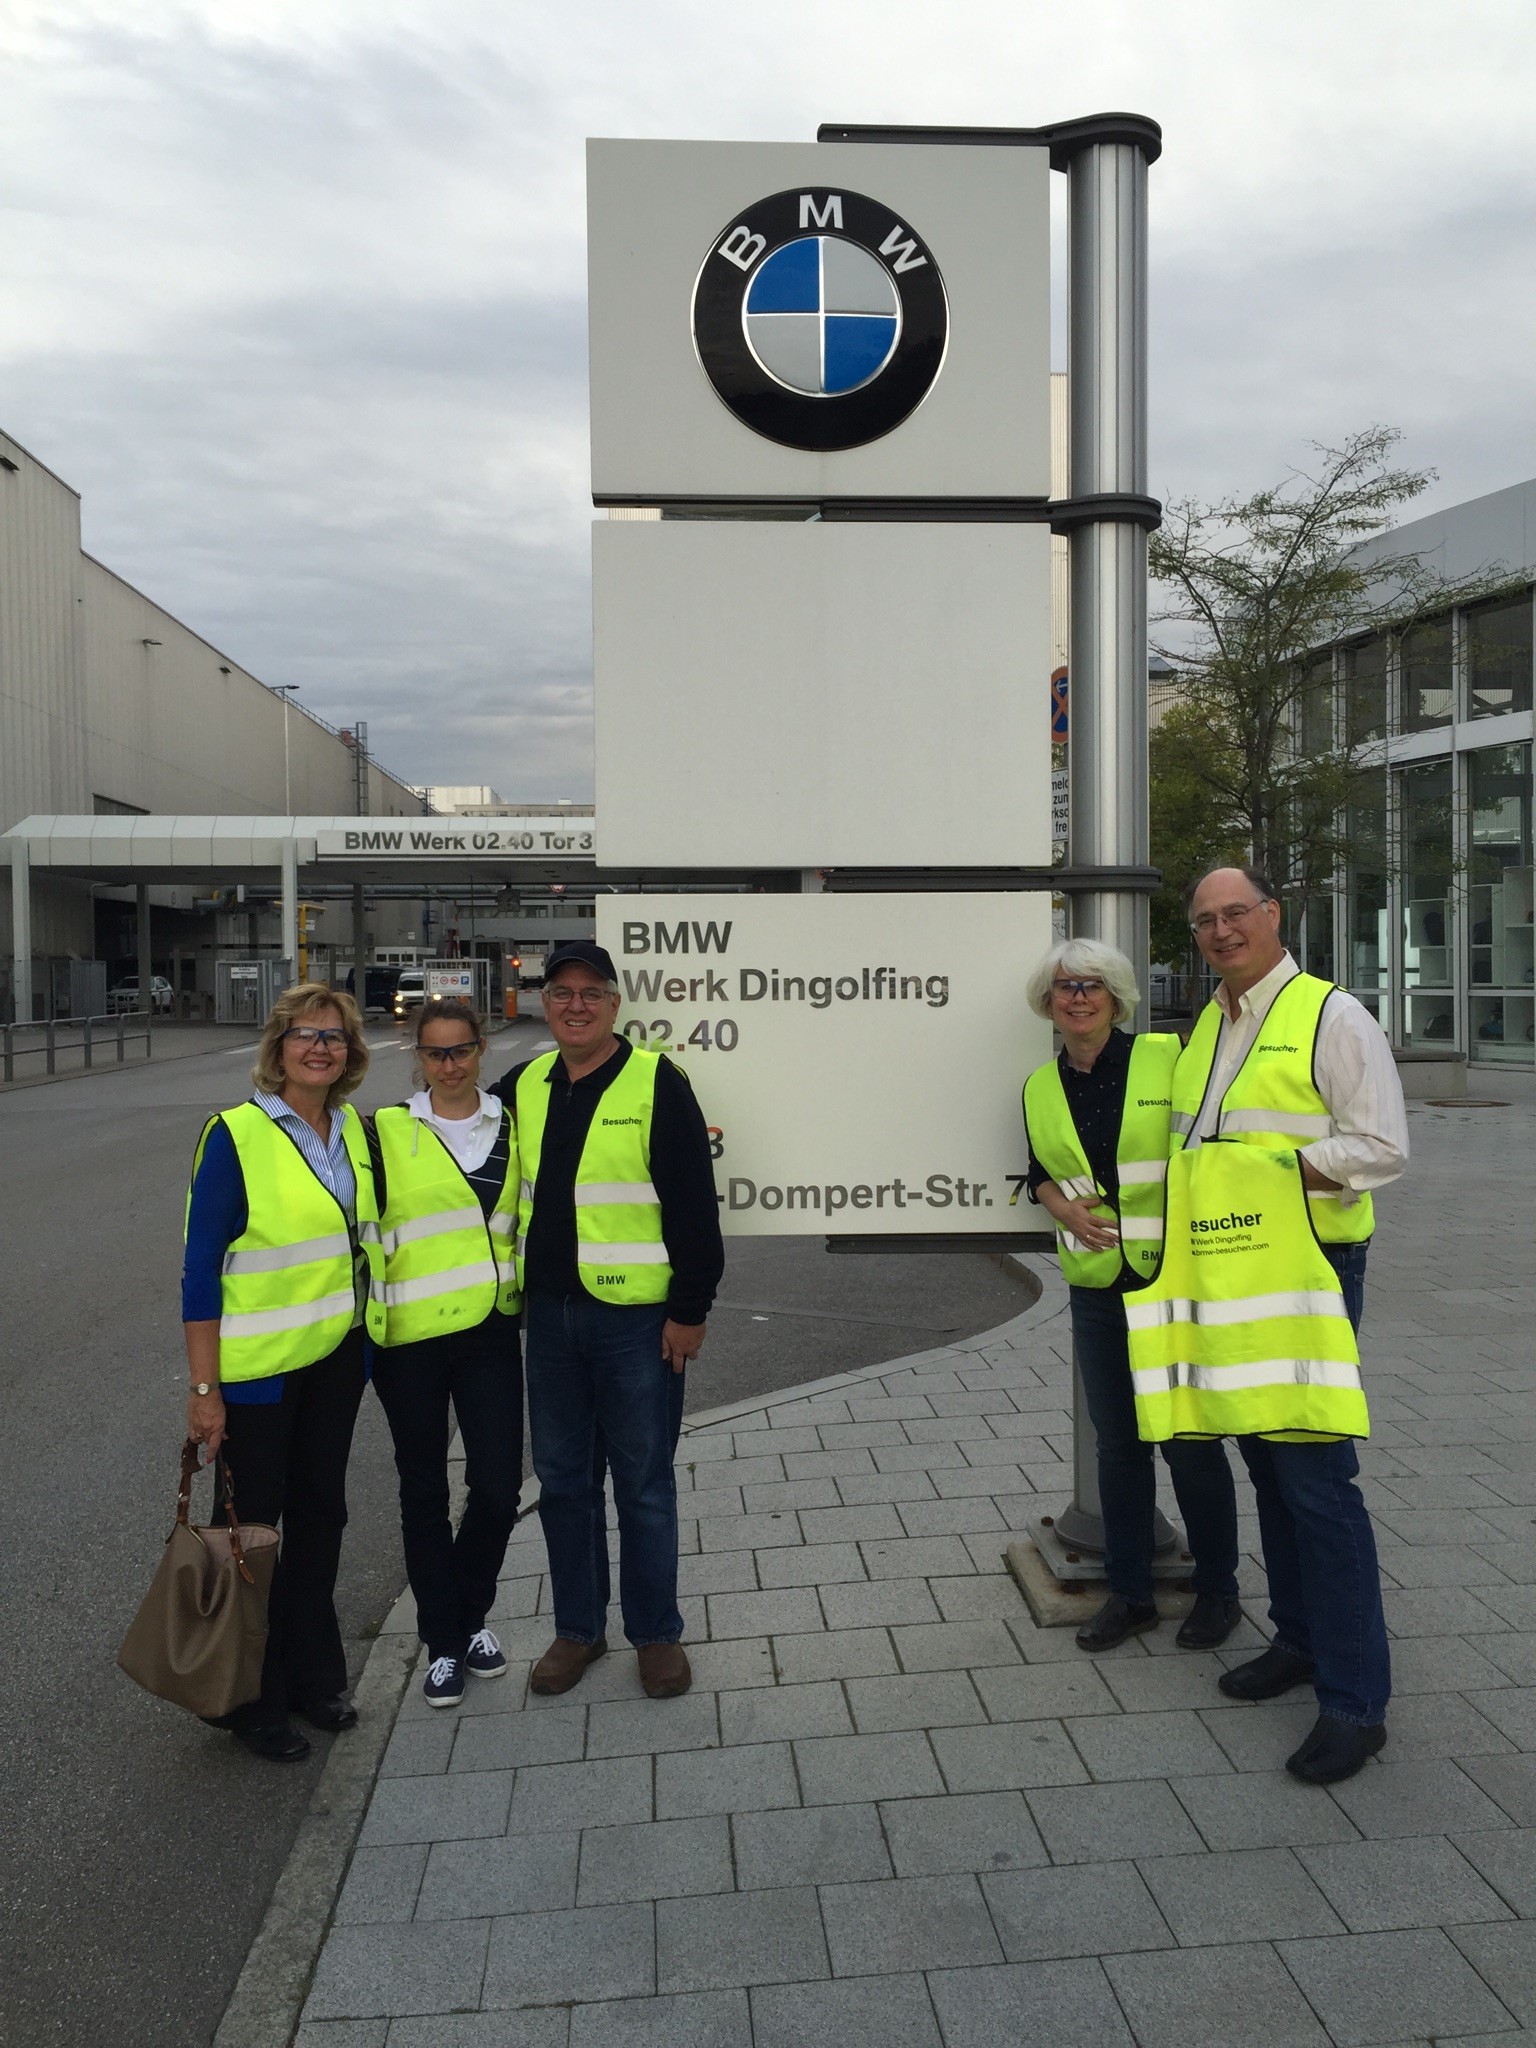 Outside he BMW plant where Sina works in Germany